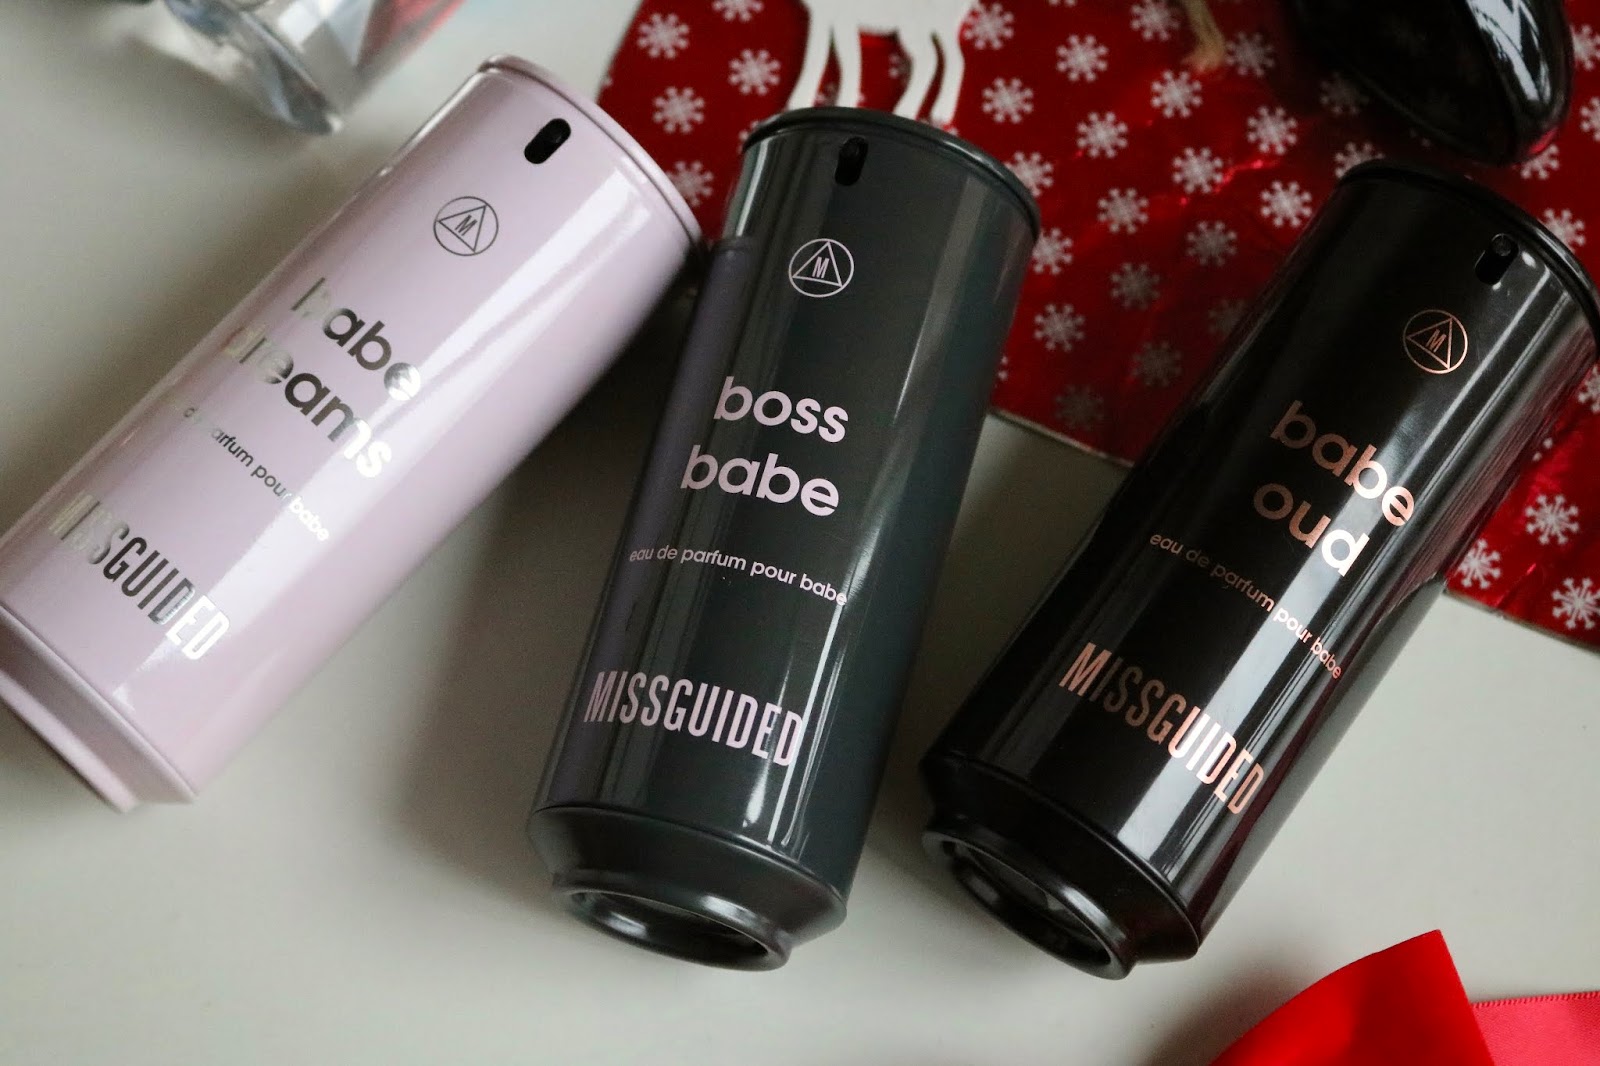 MISSGUIDED BABE OUD, BOSS BABE AND BABE DREAMS PERFUME £28